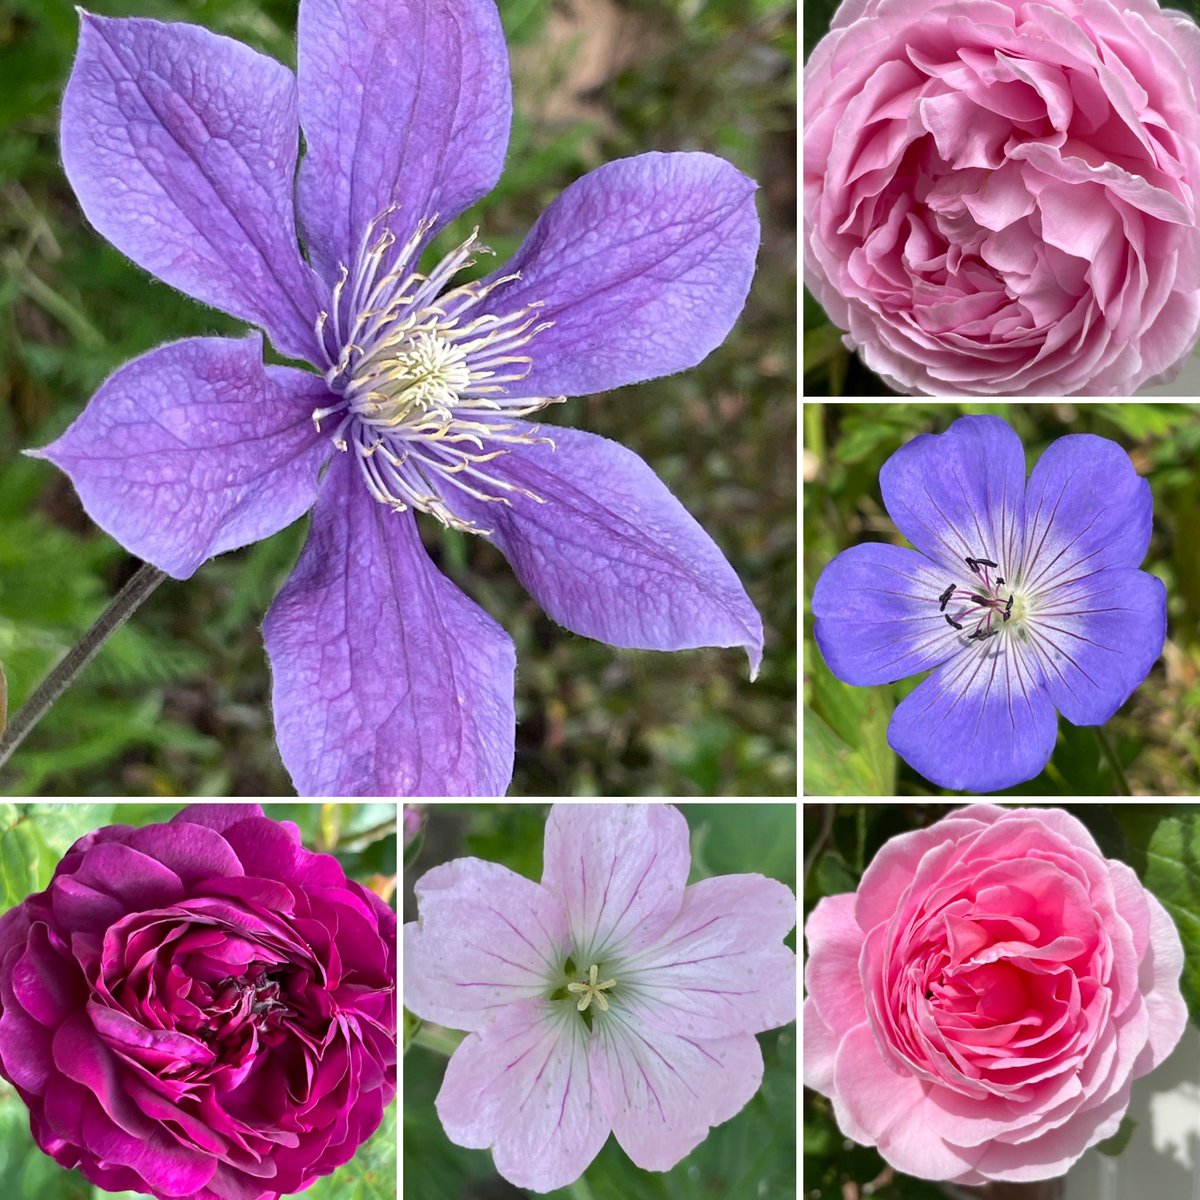 Roses, clematis and geraniums 🩷💜💙 #GardenTwitter